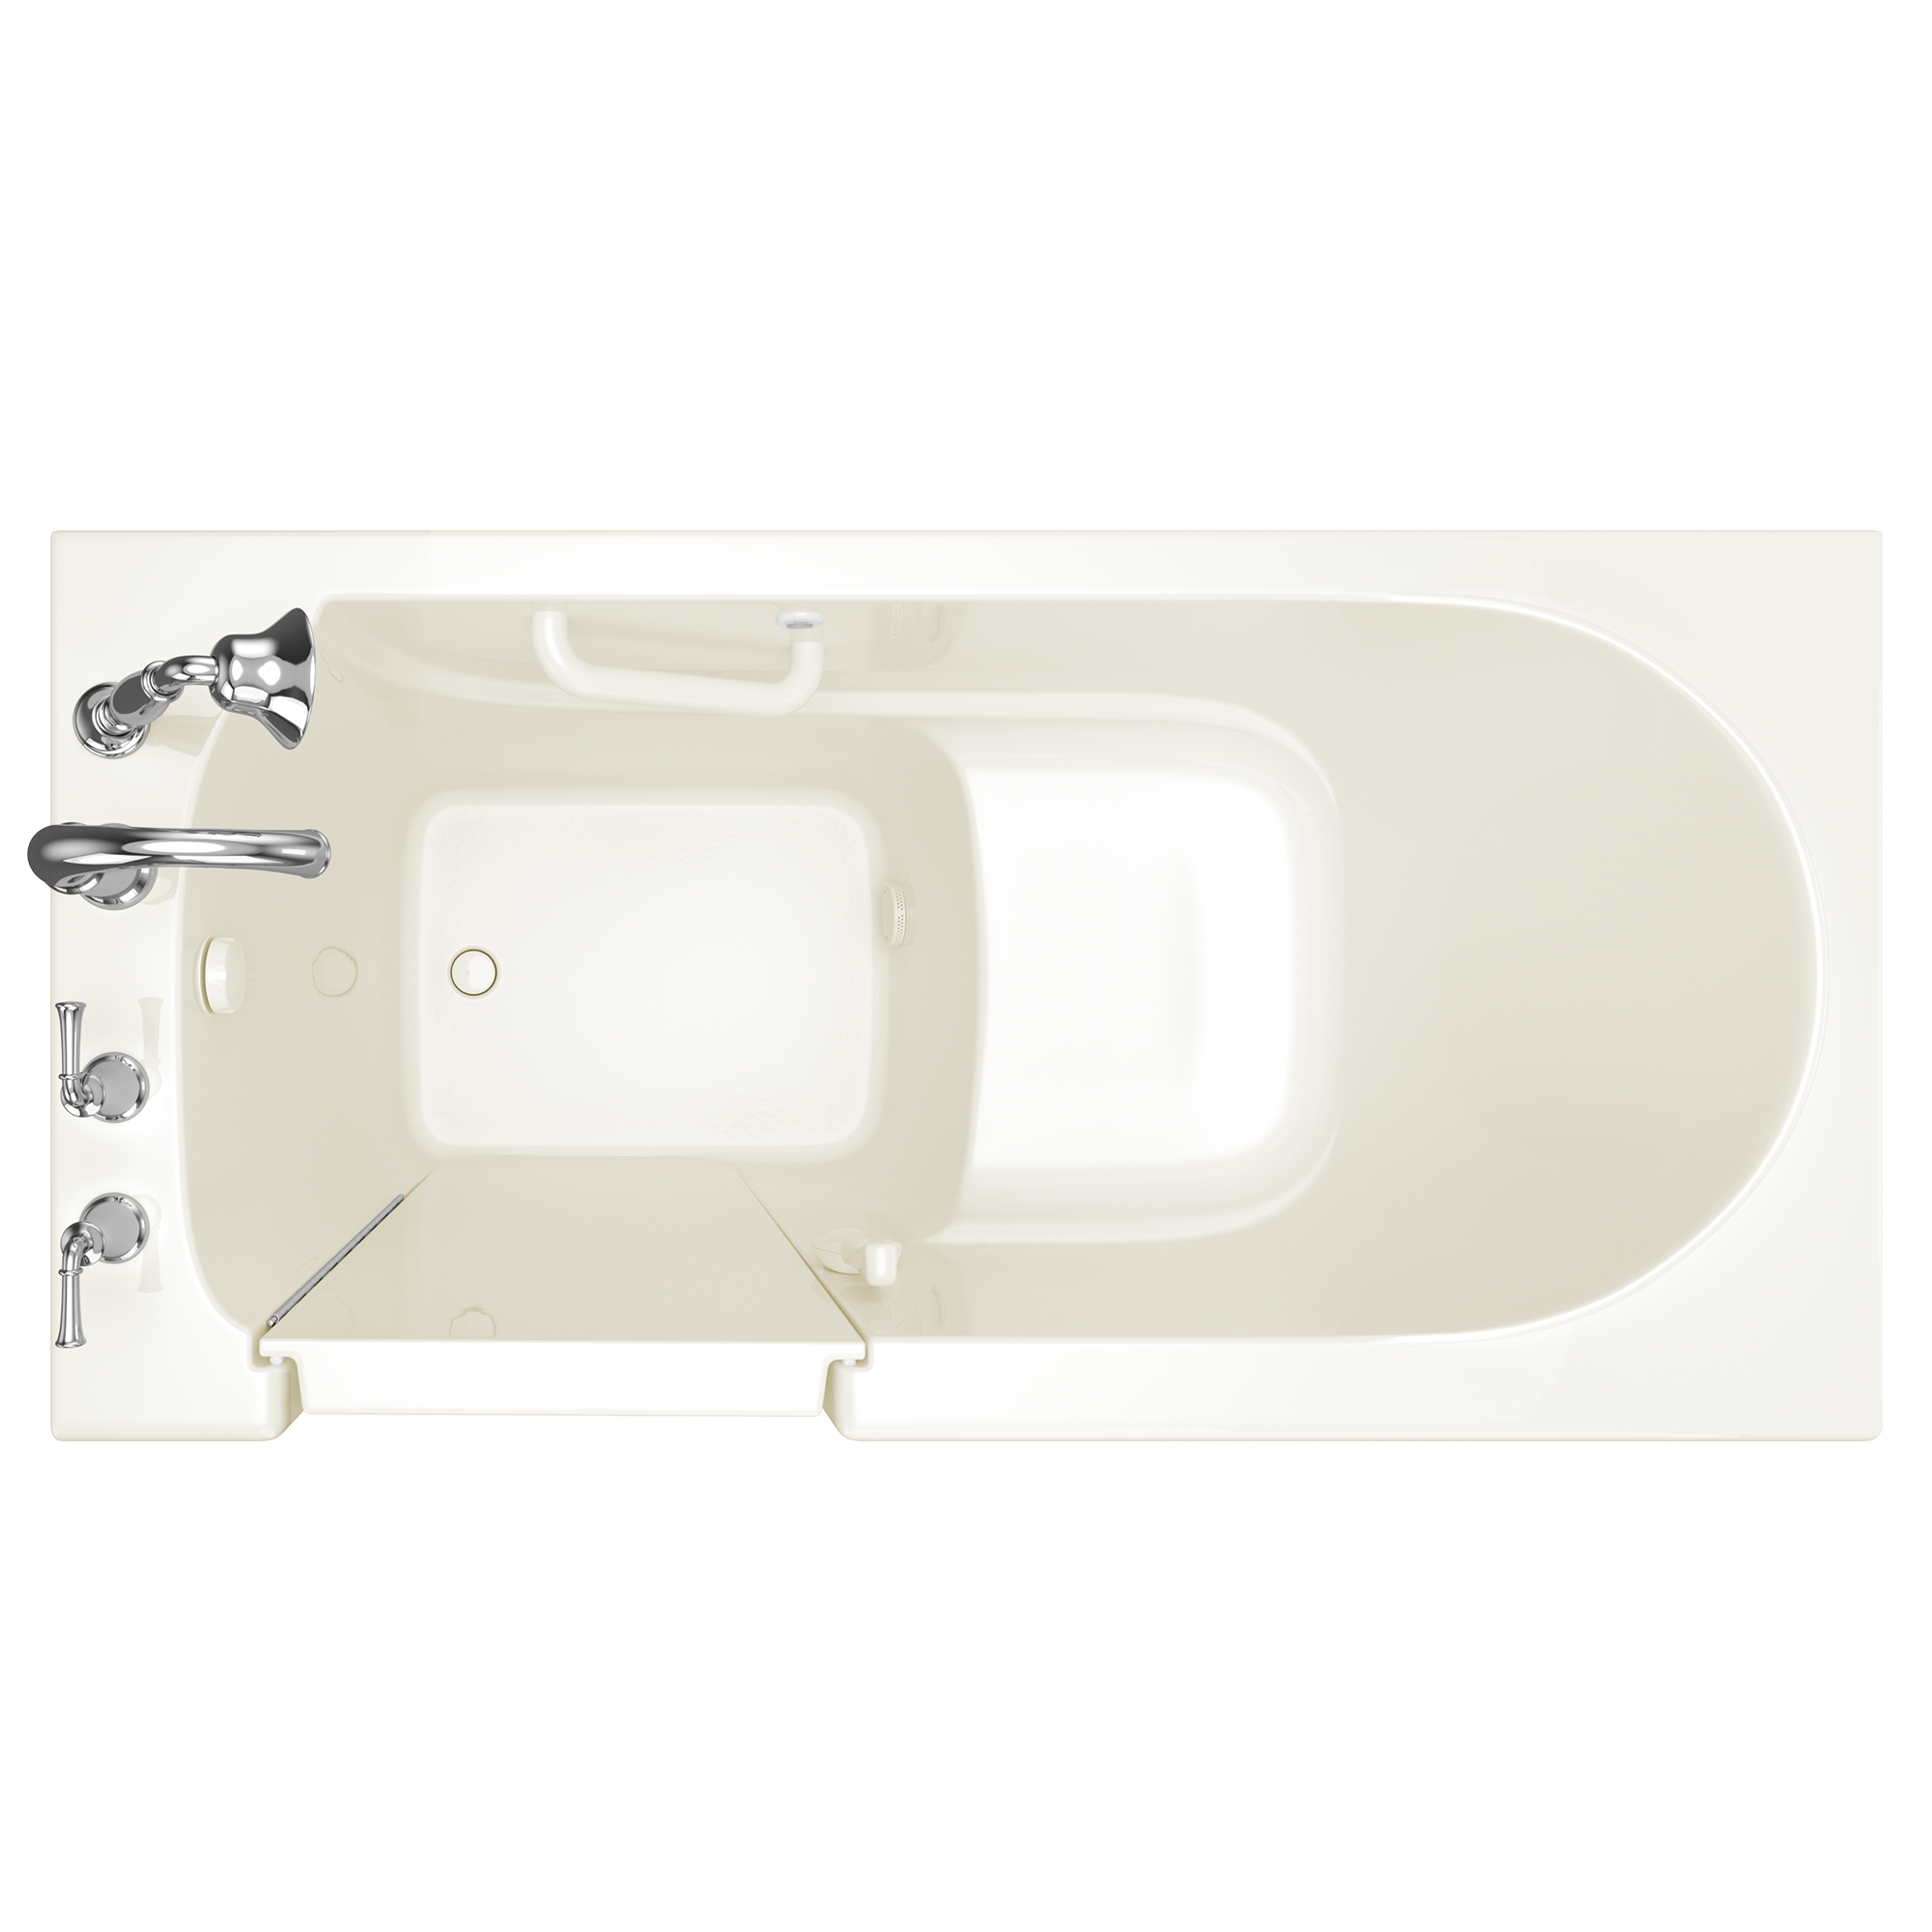 Gelcoat Value Series 30 x 60 -Inch Walk-in Tub With Soaker System - Left-Hand Drain With Faucet